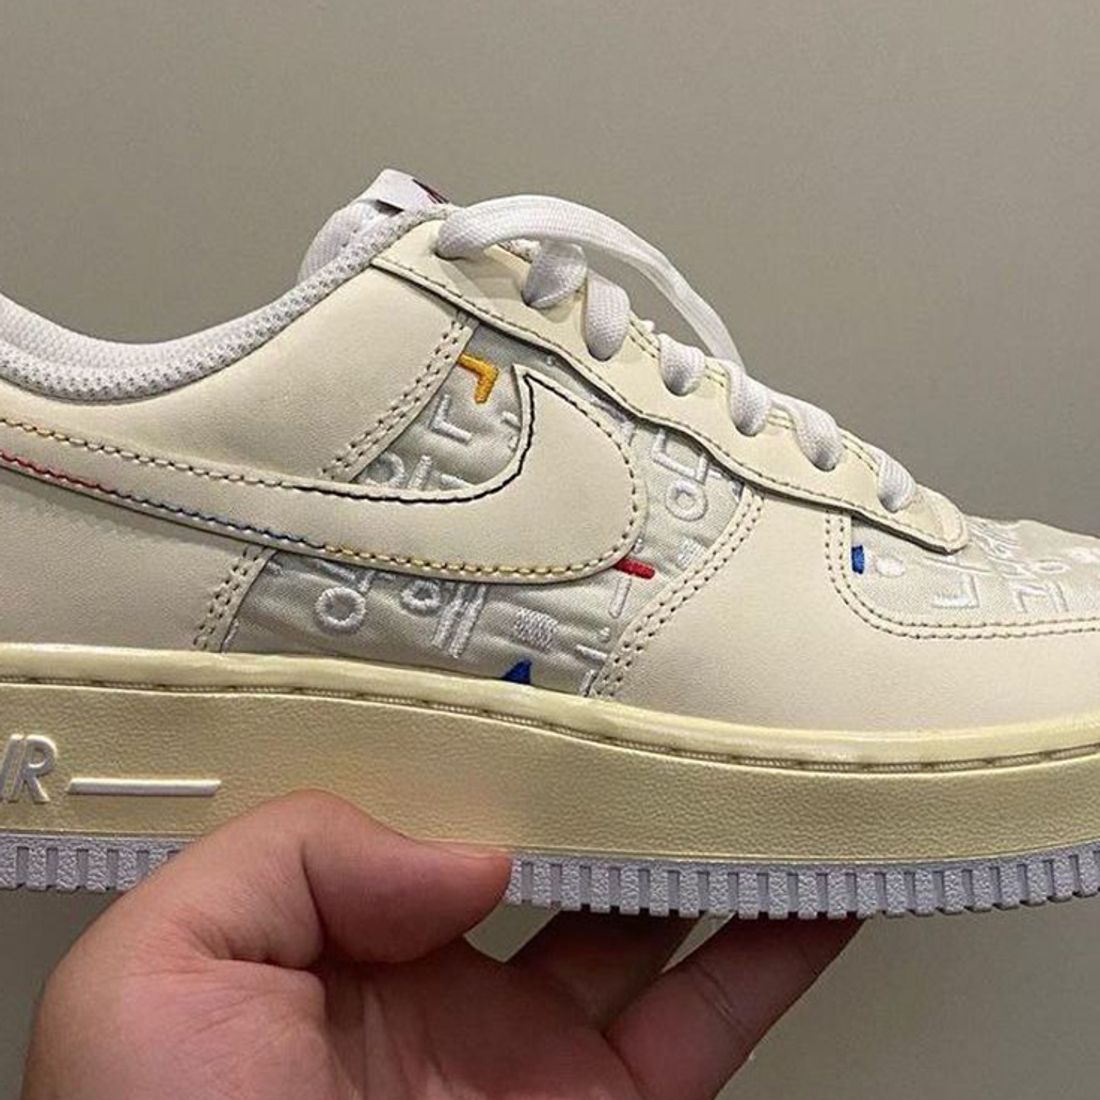 Rumoured: Another Off-White x Nike Air Force 1 is in the Works - Sneaker  Freaker